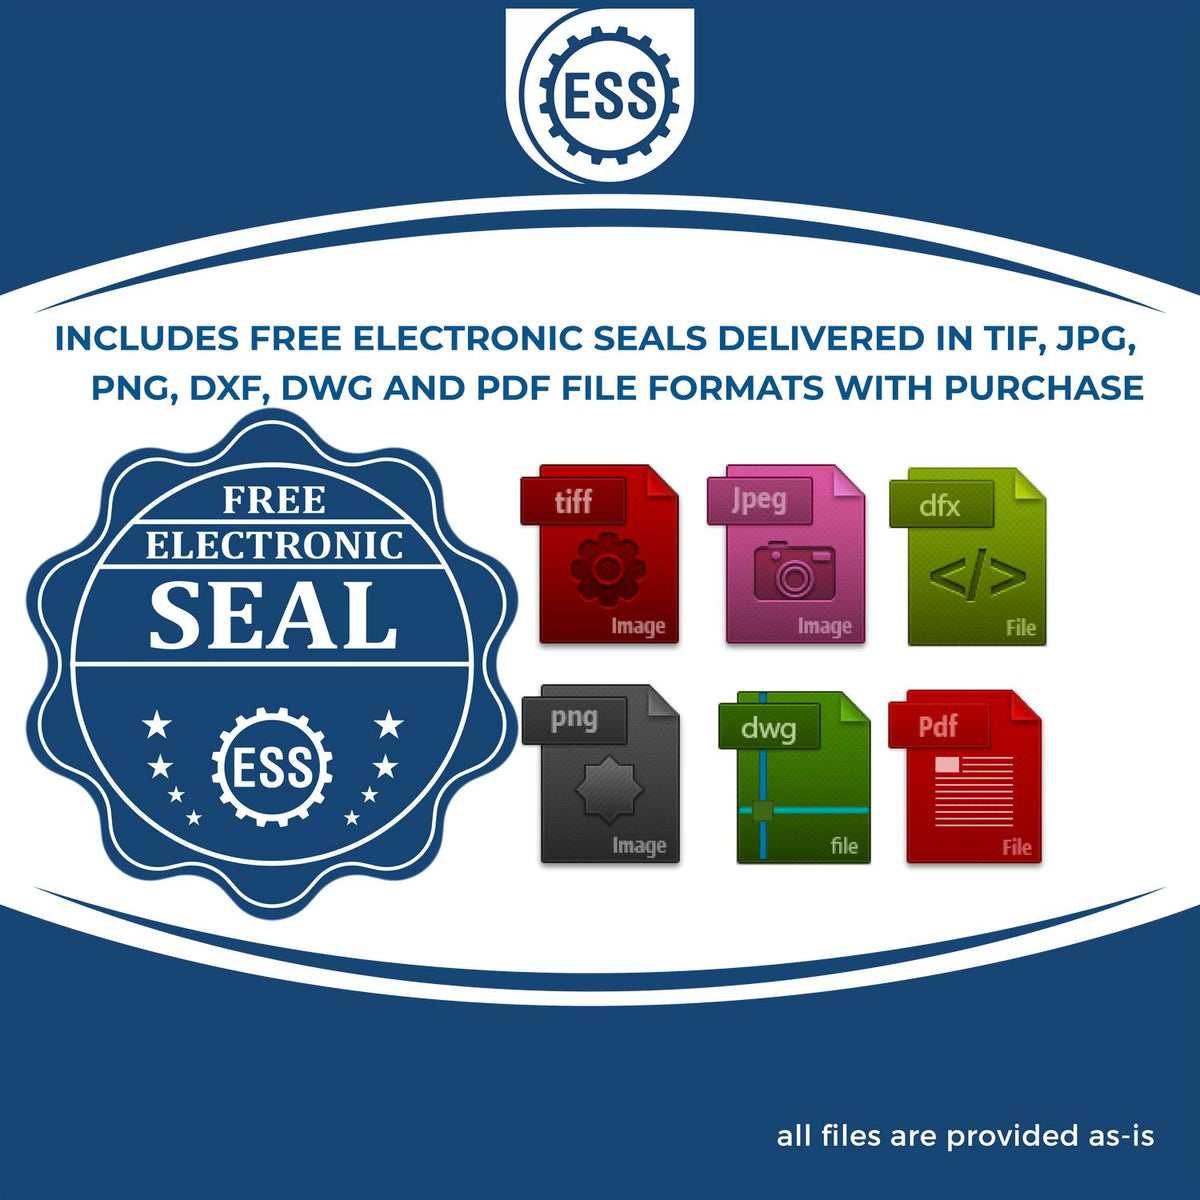 An infographic for the free electronic seal for the Hybrid Michigan Architect Seal illustrating the different file type icons such as DXF, DWG, TIF, JPG and PNG.